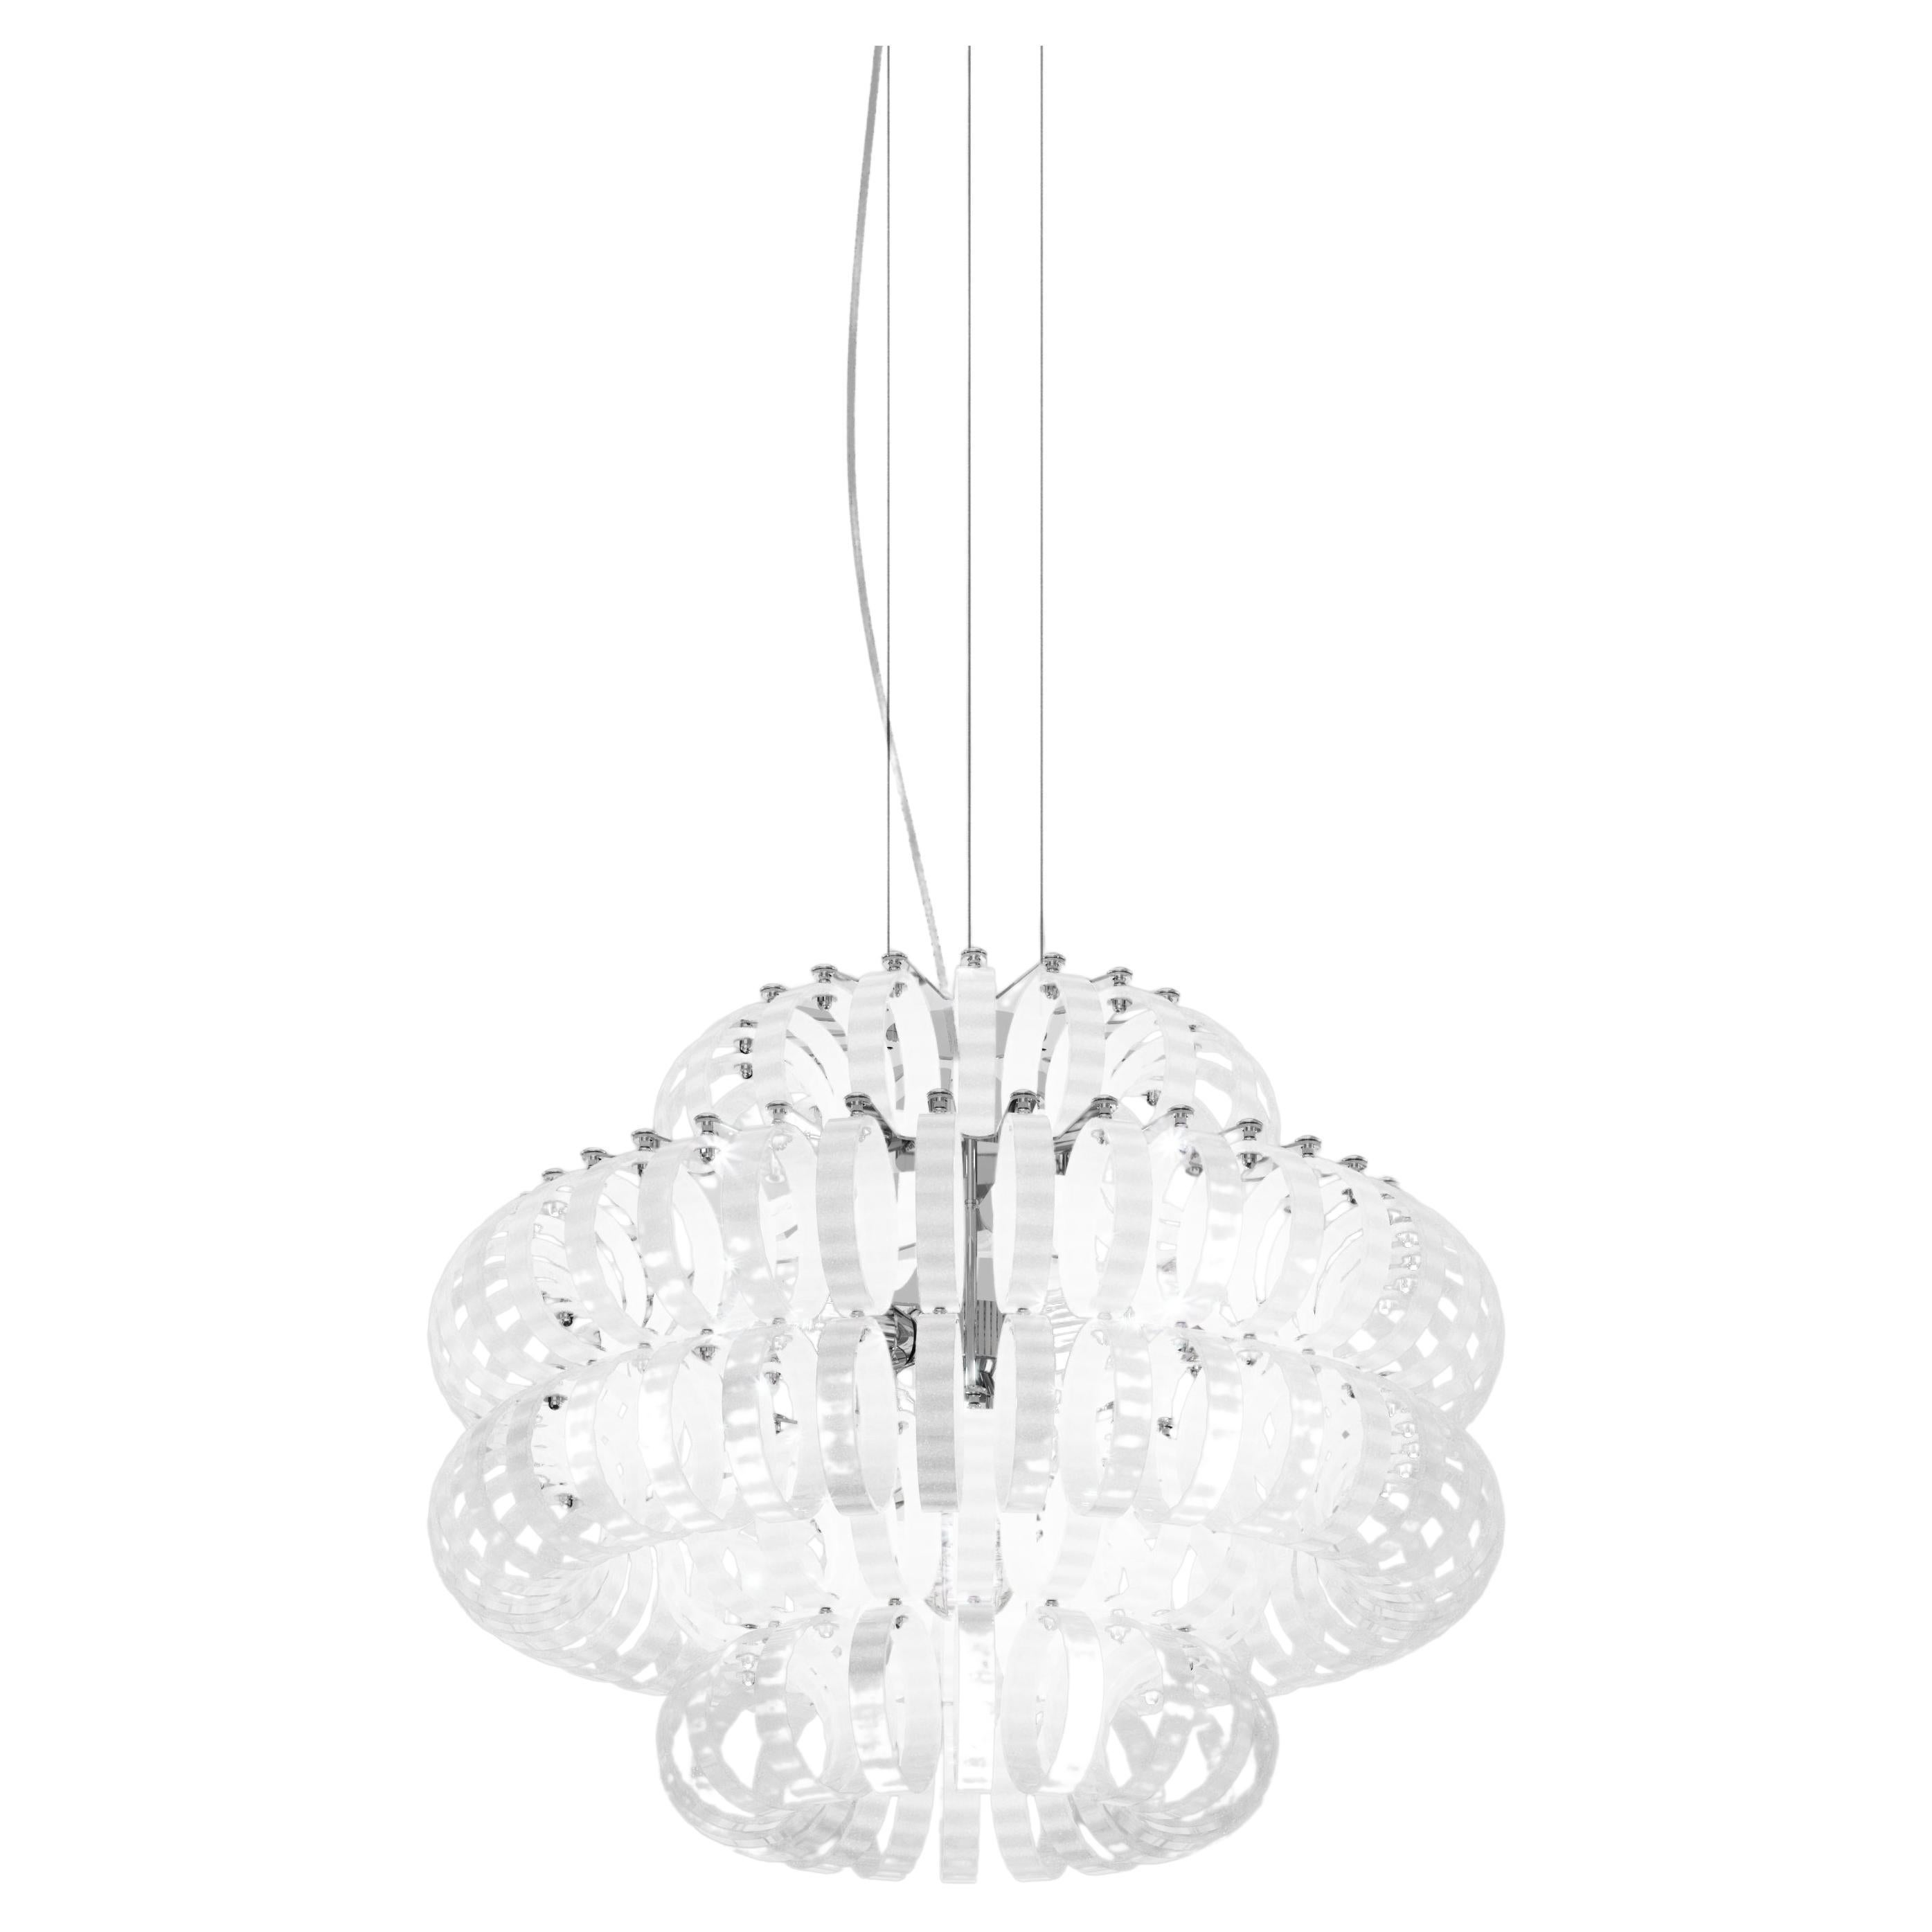 Vistosi Ecos Pendant Light in White Striped Glass And Glossy Chrome Frame For Sale